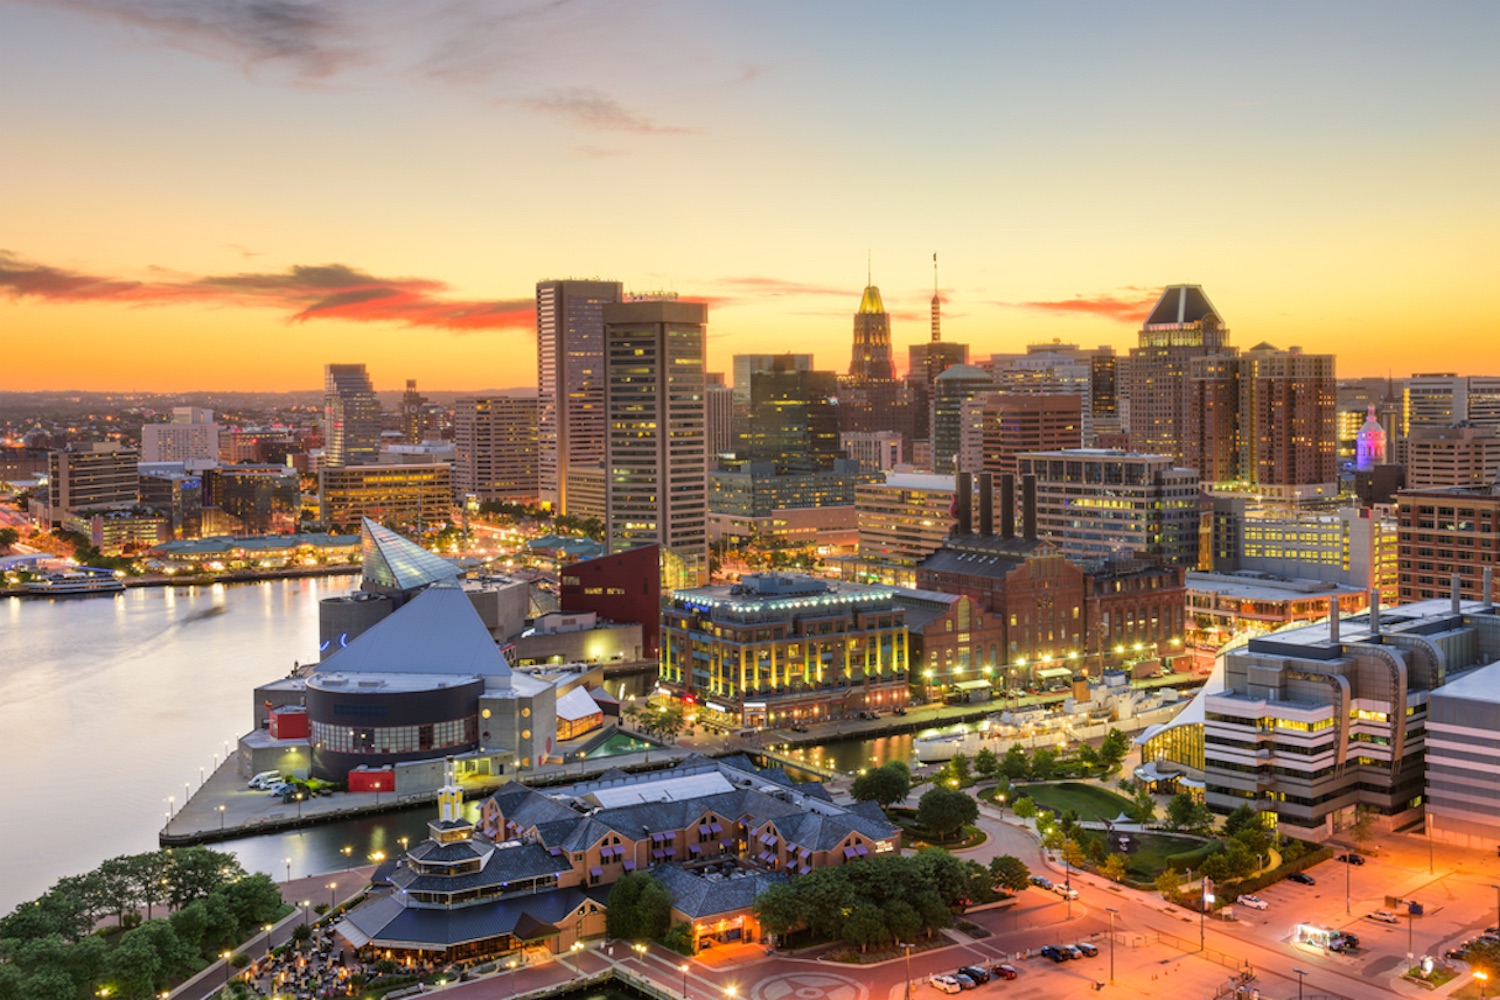 Skyline of downtown Baltimore at sunset, looking west as seen from the vantage point of Harbor East.